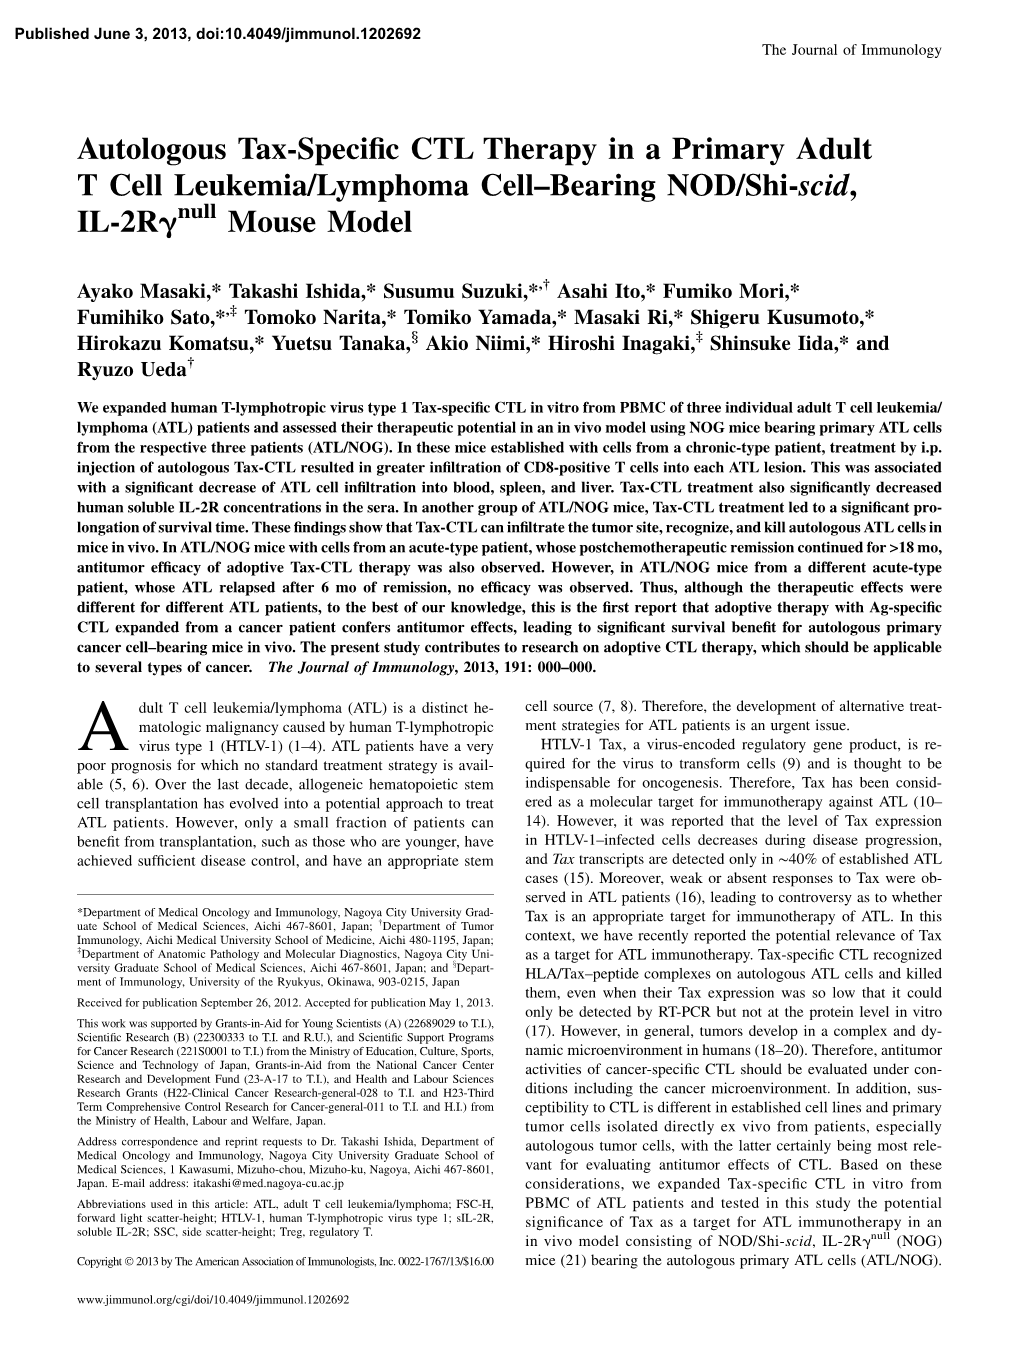 Mouse Model Null Γ , IL-2R Scid Bearing NOD/Shi- − Cell Primary Adult T Cell Leukemia/Lymphoma Autologous Tax-Specific CTL Th